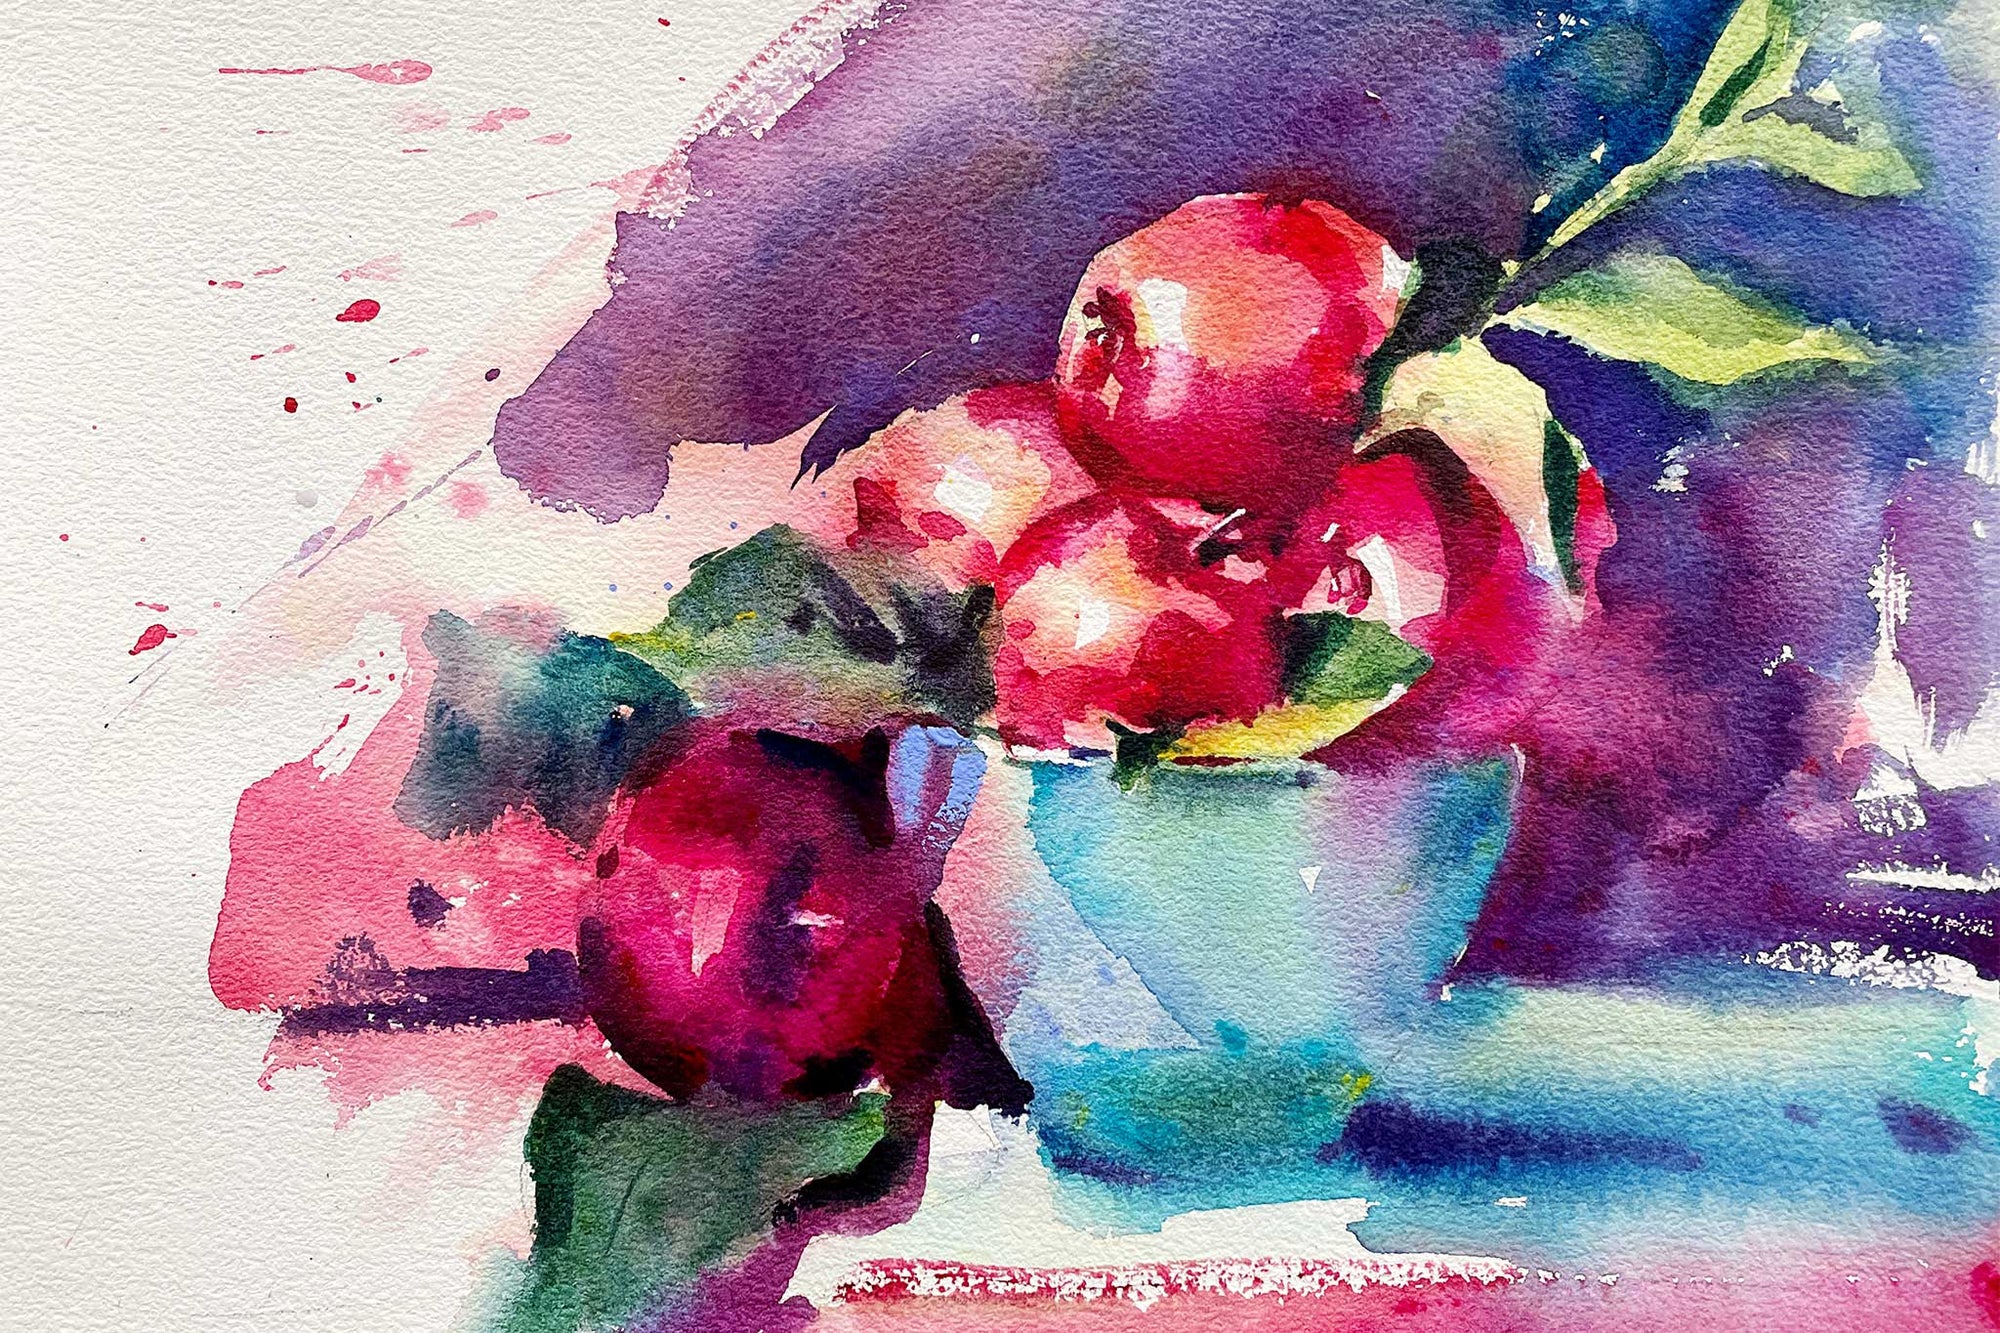 34. Throwing the Paint Around - A Bowl of Apples